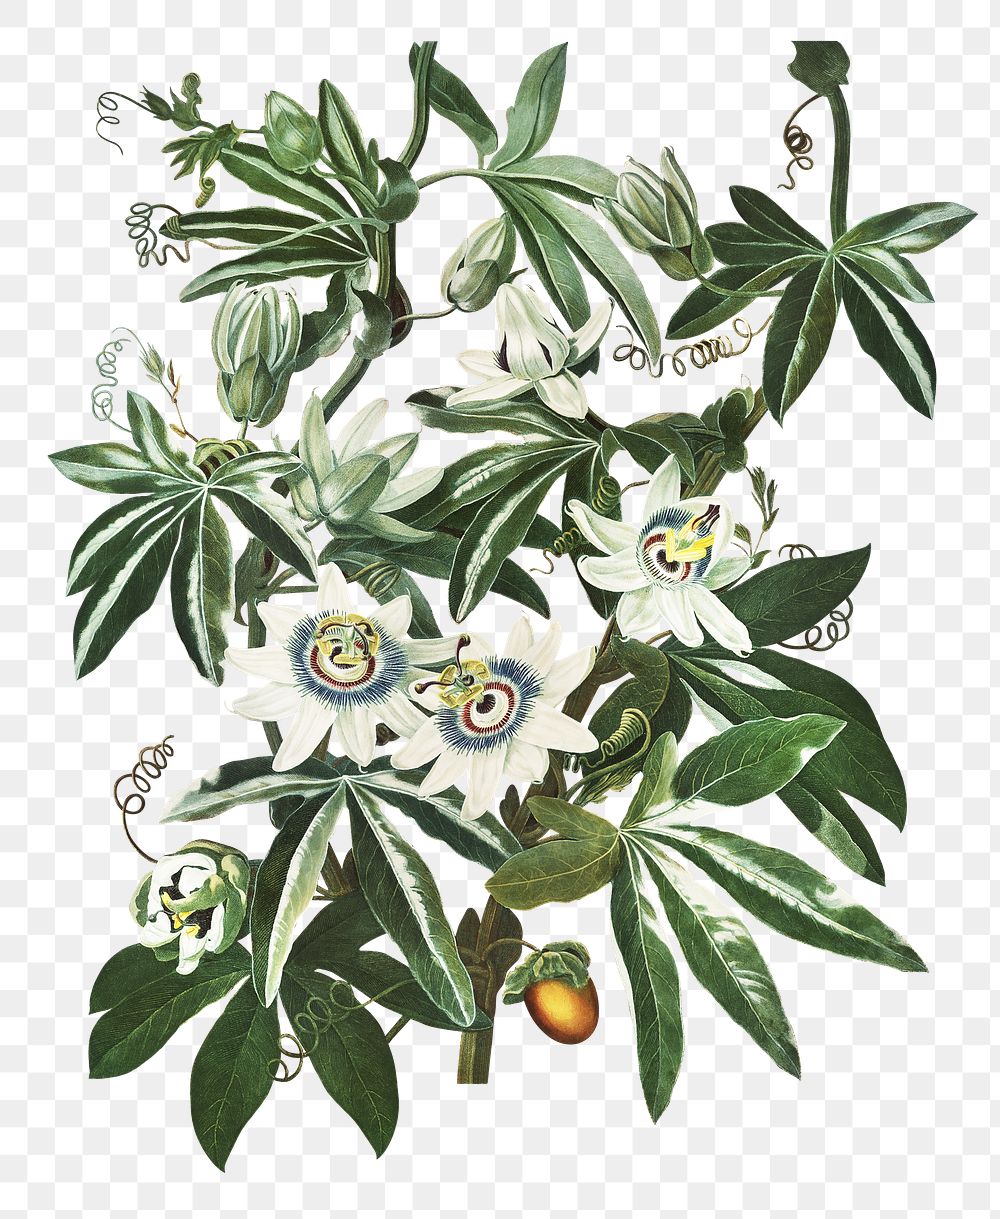 Bluecrown passionflower  png, transparent background 